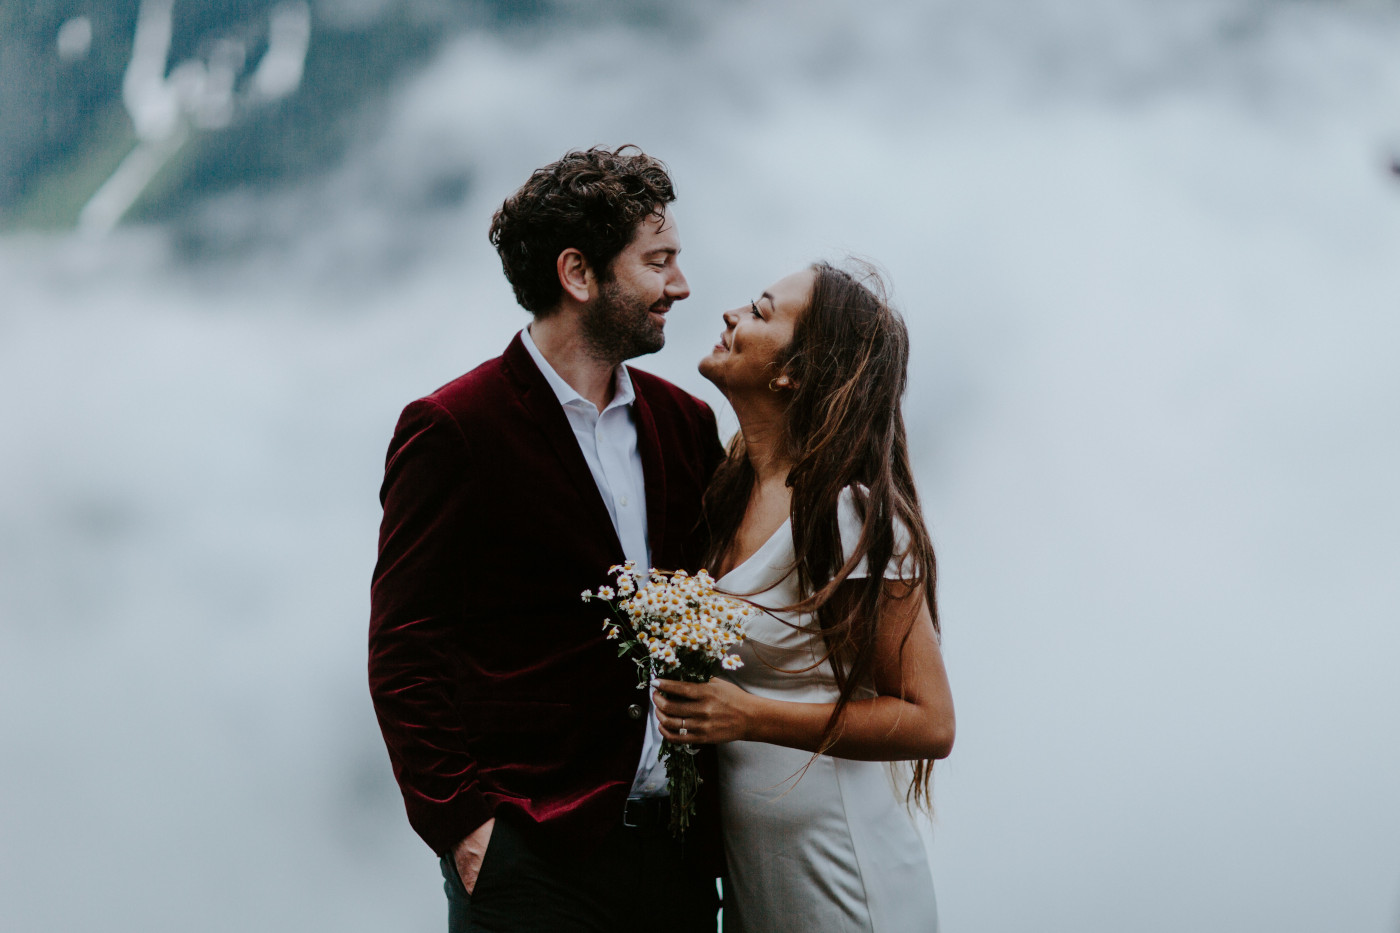 Katelyn and Murray stand in front of the clouds at Mount Hood. Elopement wedding photography at Mount Hood by Sienna Plus Josh.